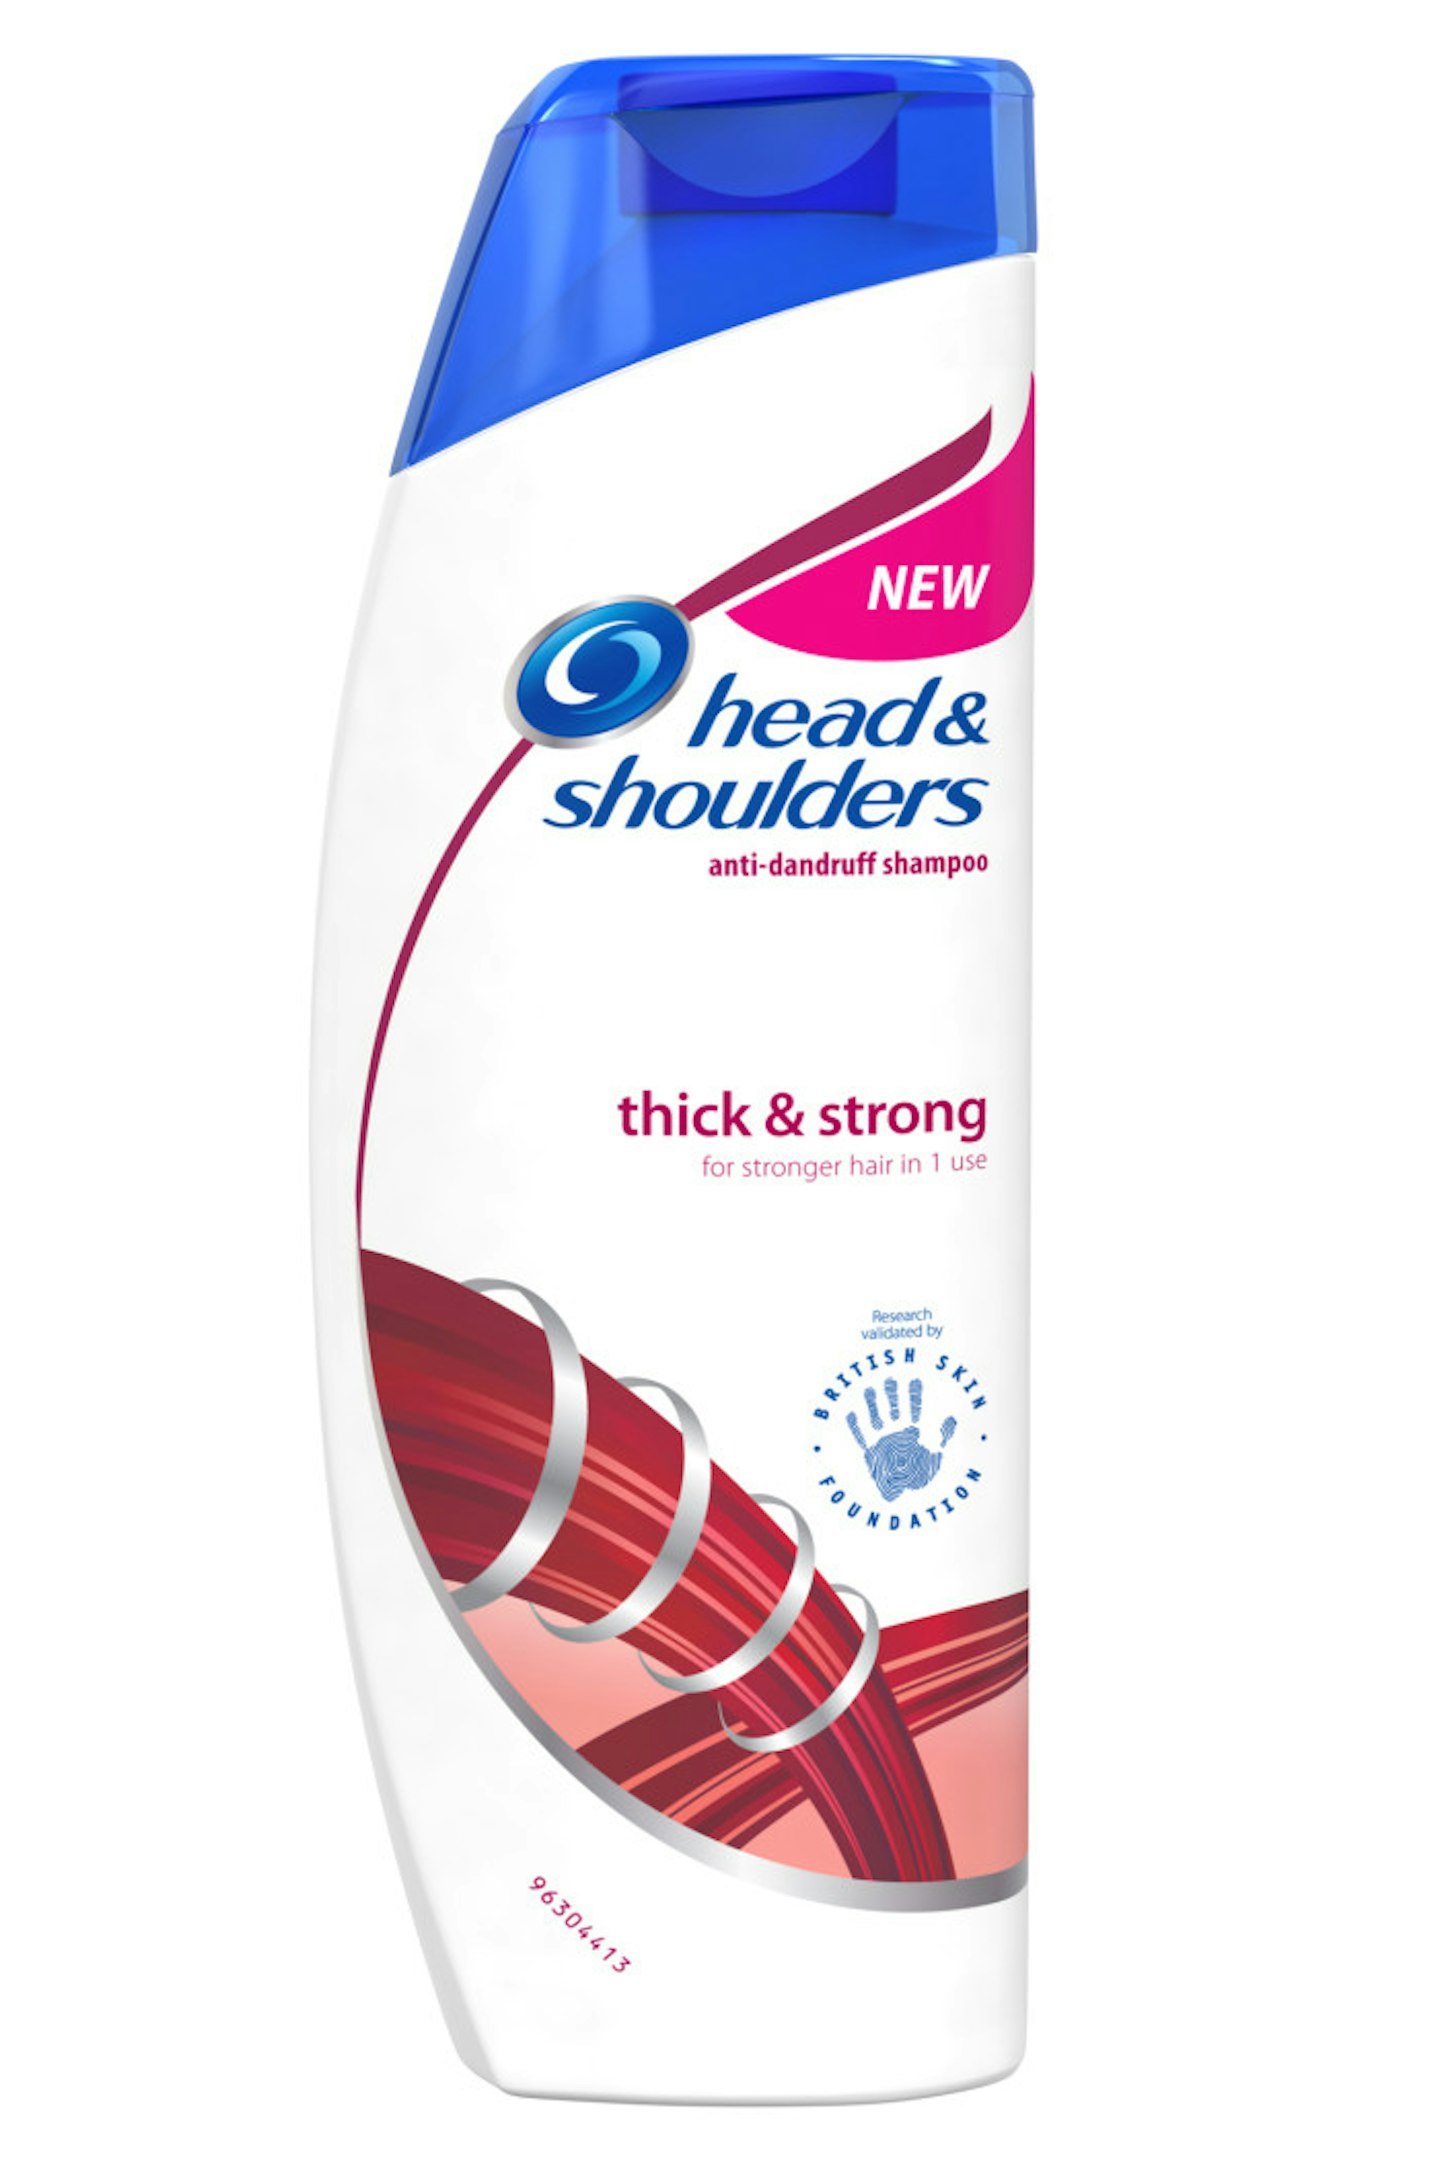 Head and Shoulders Thick & Strong Shampoo, £2.79